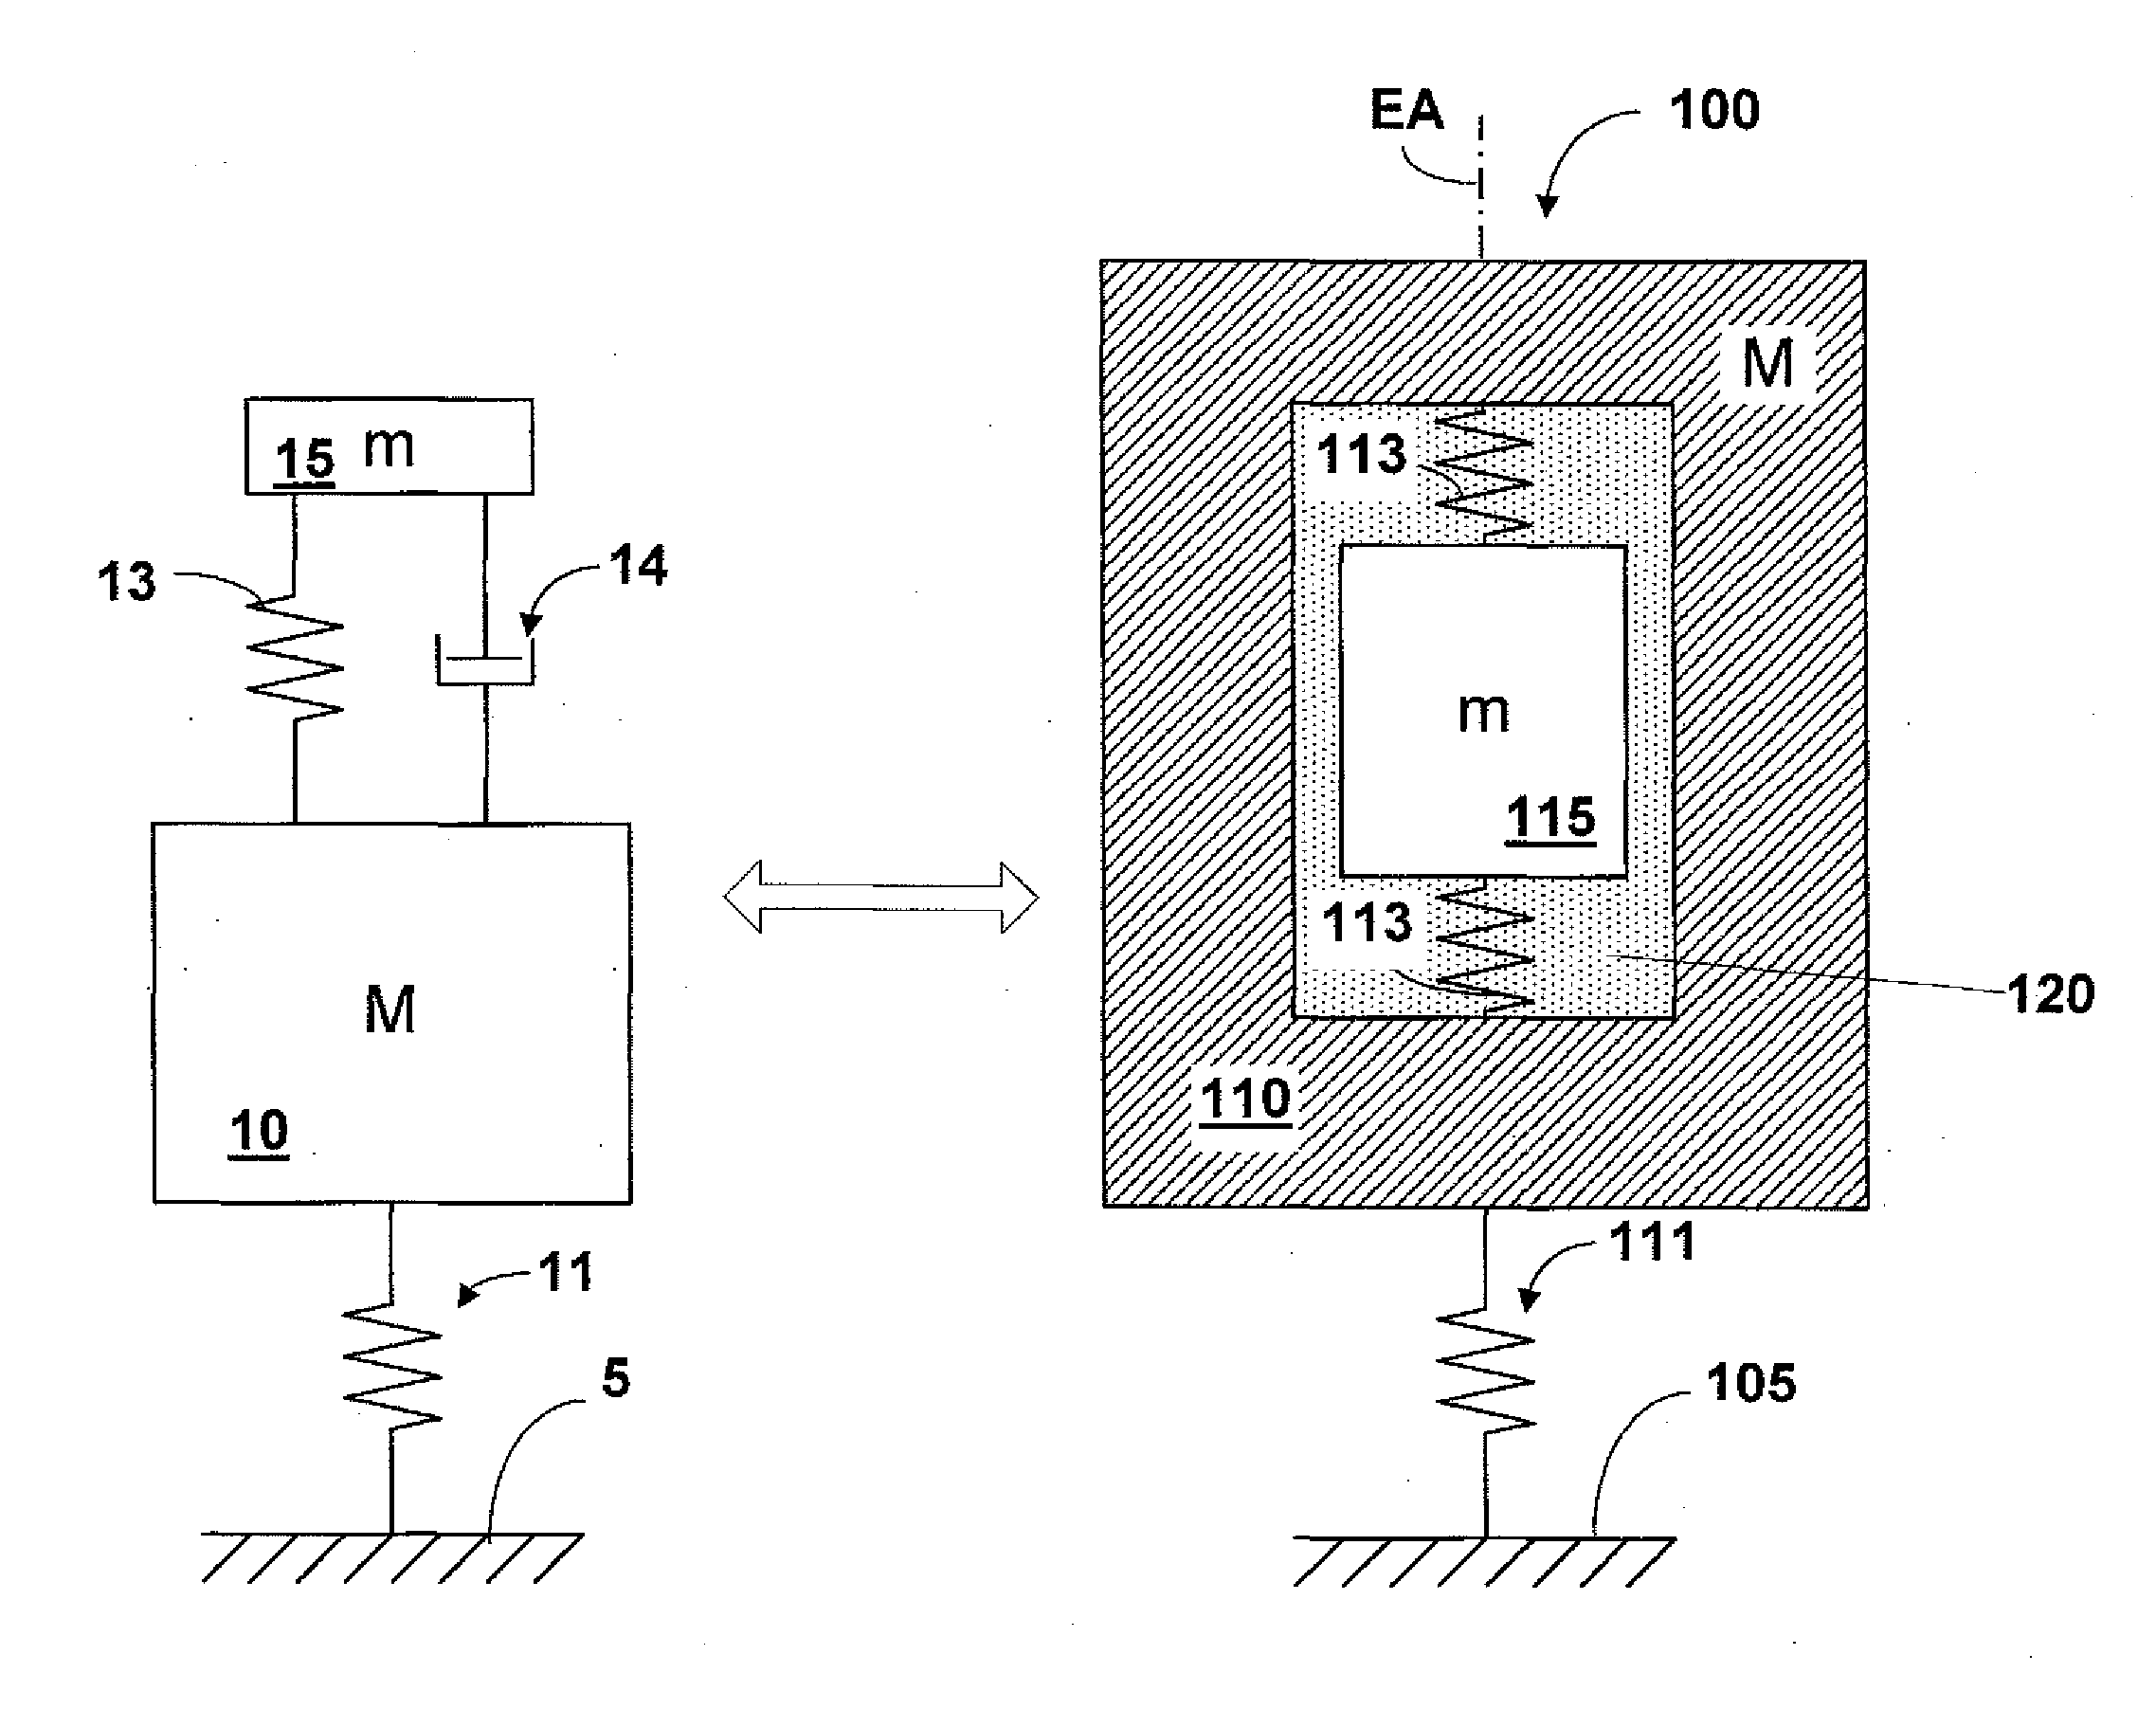 Damping arrangement for dissipating oscillating energy of an element in a system, more particularly in a microlithographic projection exposure apparatus